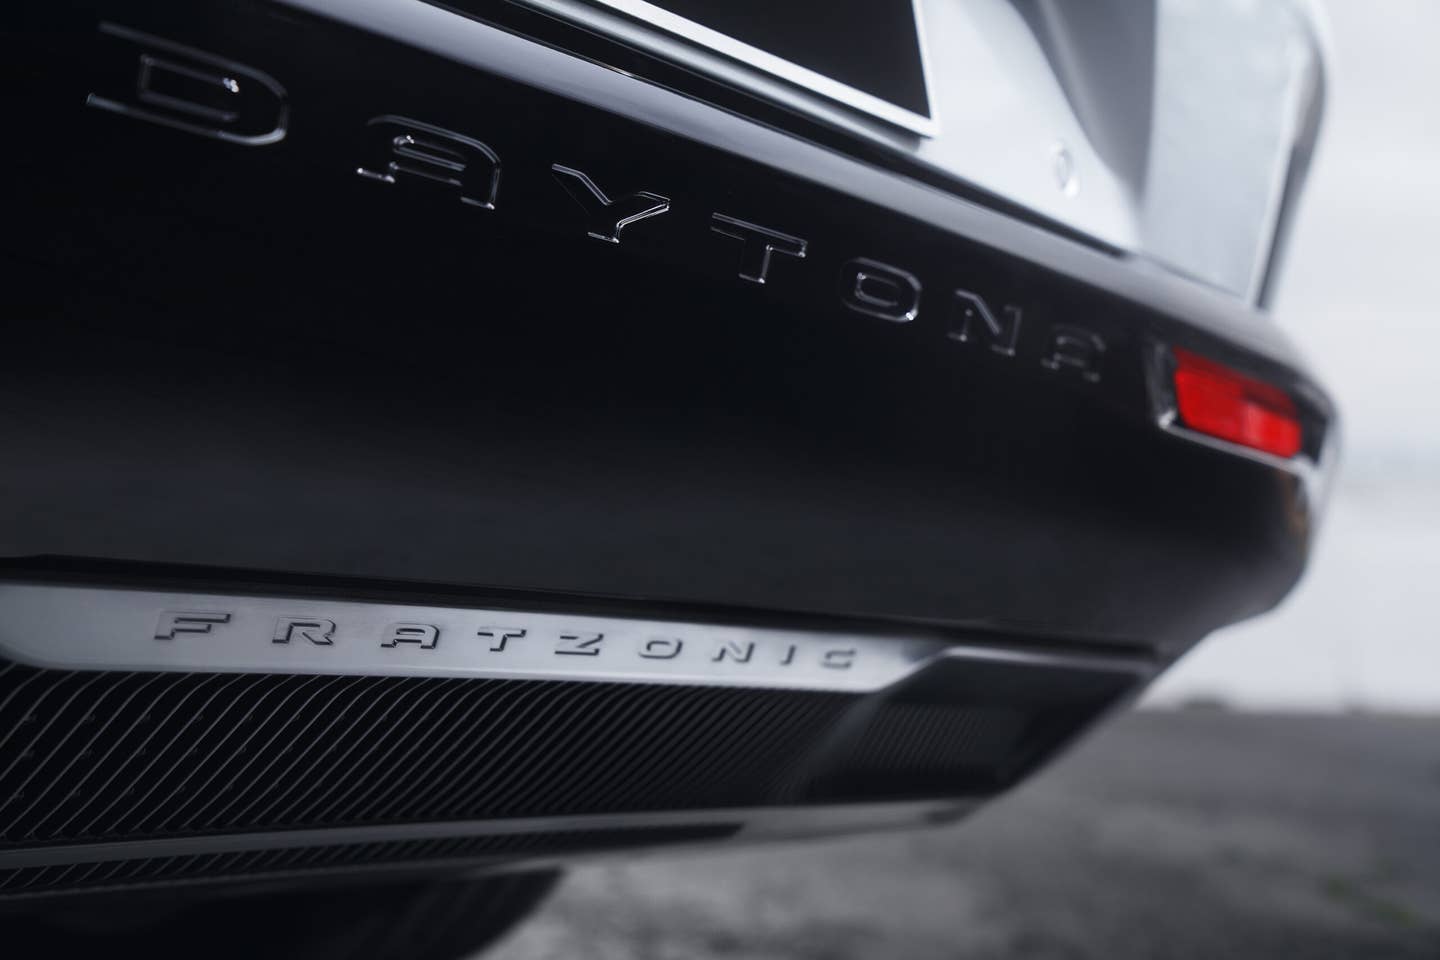 The patent-pending Fratzonic Chambered Exhaust system for Dodge Charger Daytona models creates a unique exhaust profile with Hellcat levels of sound intensity that shatters the preconception of a typical quiet BEV.